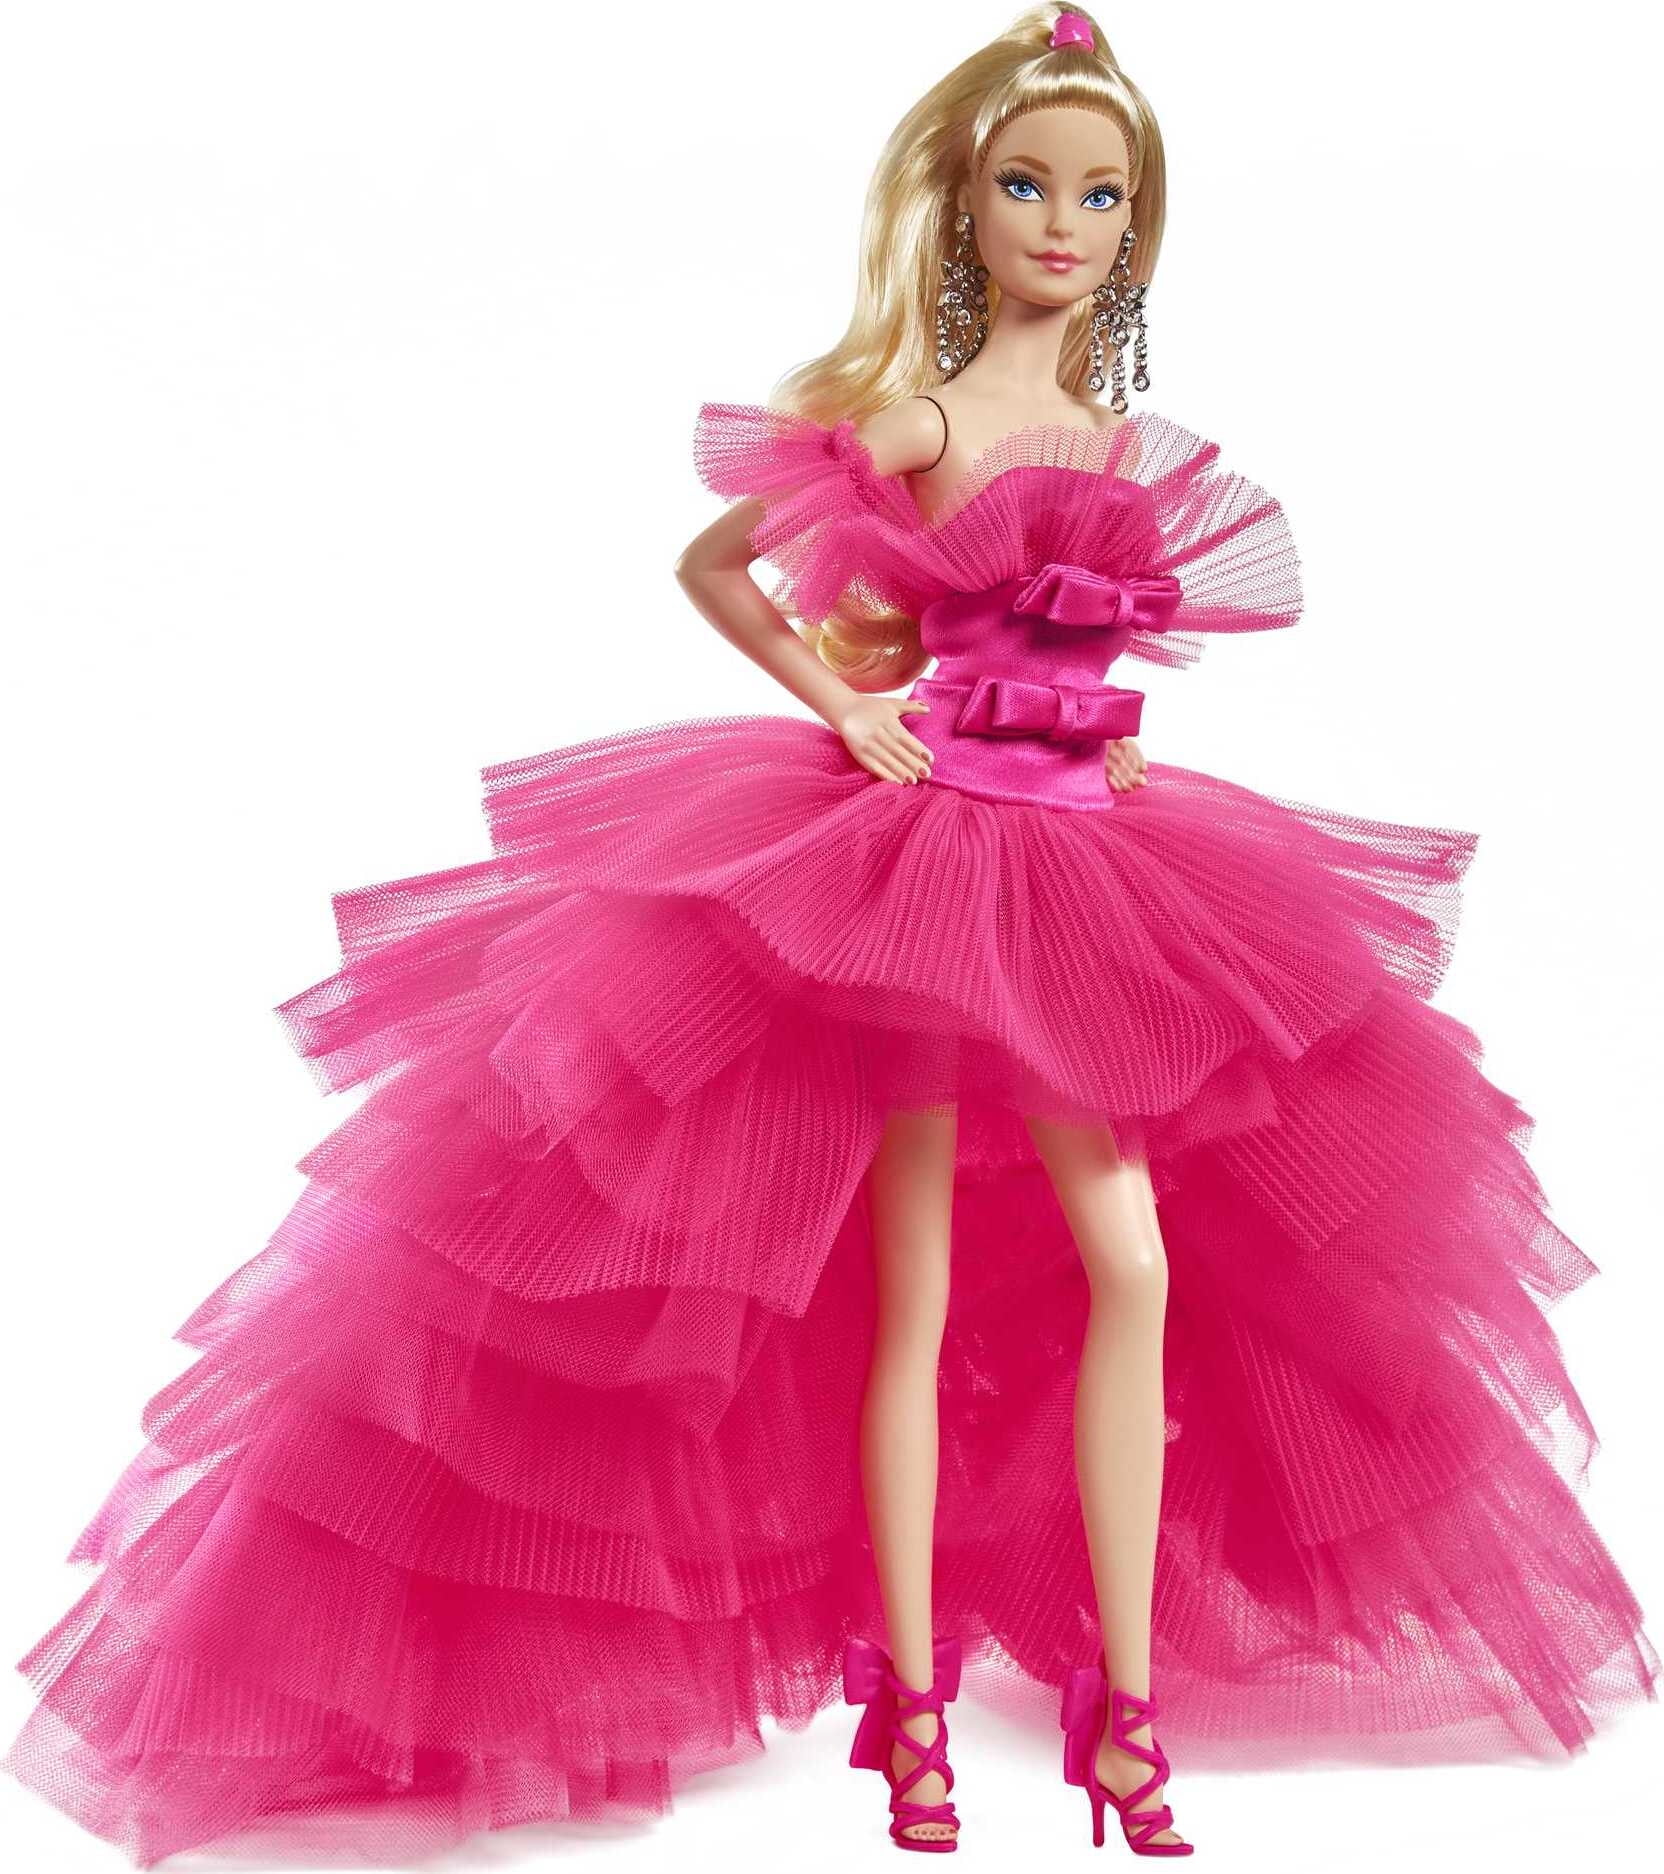 Red gown for Barbie dolls Christmas balloon dress for barbie – The Doll  Tailor